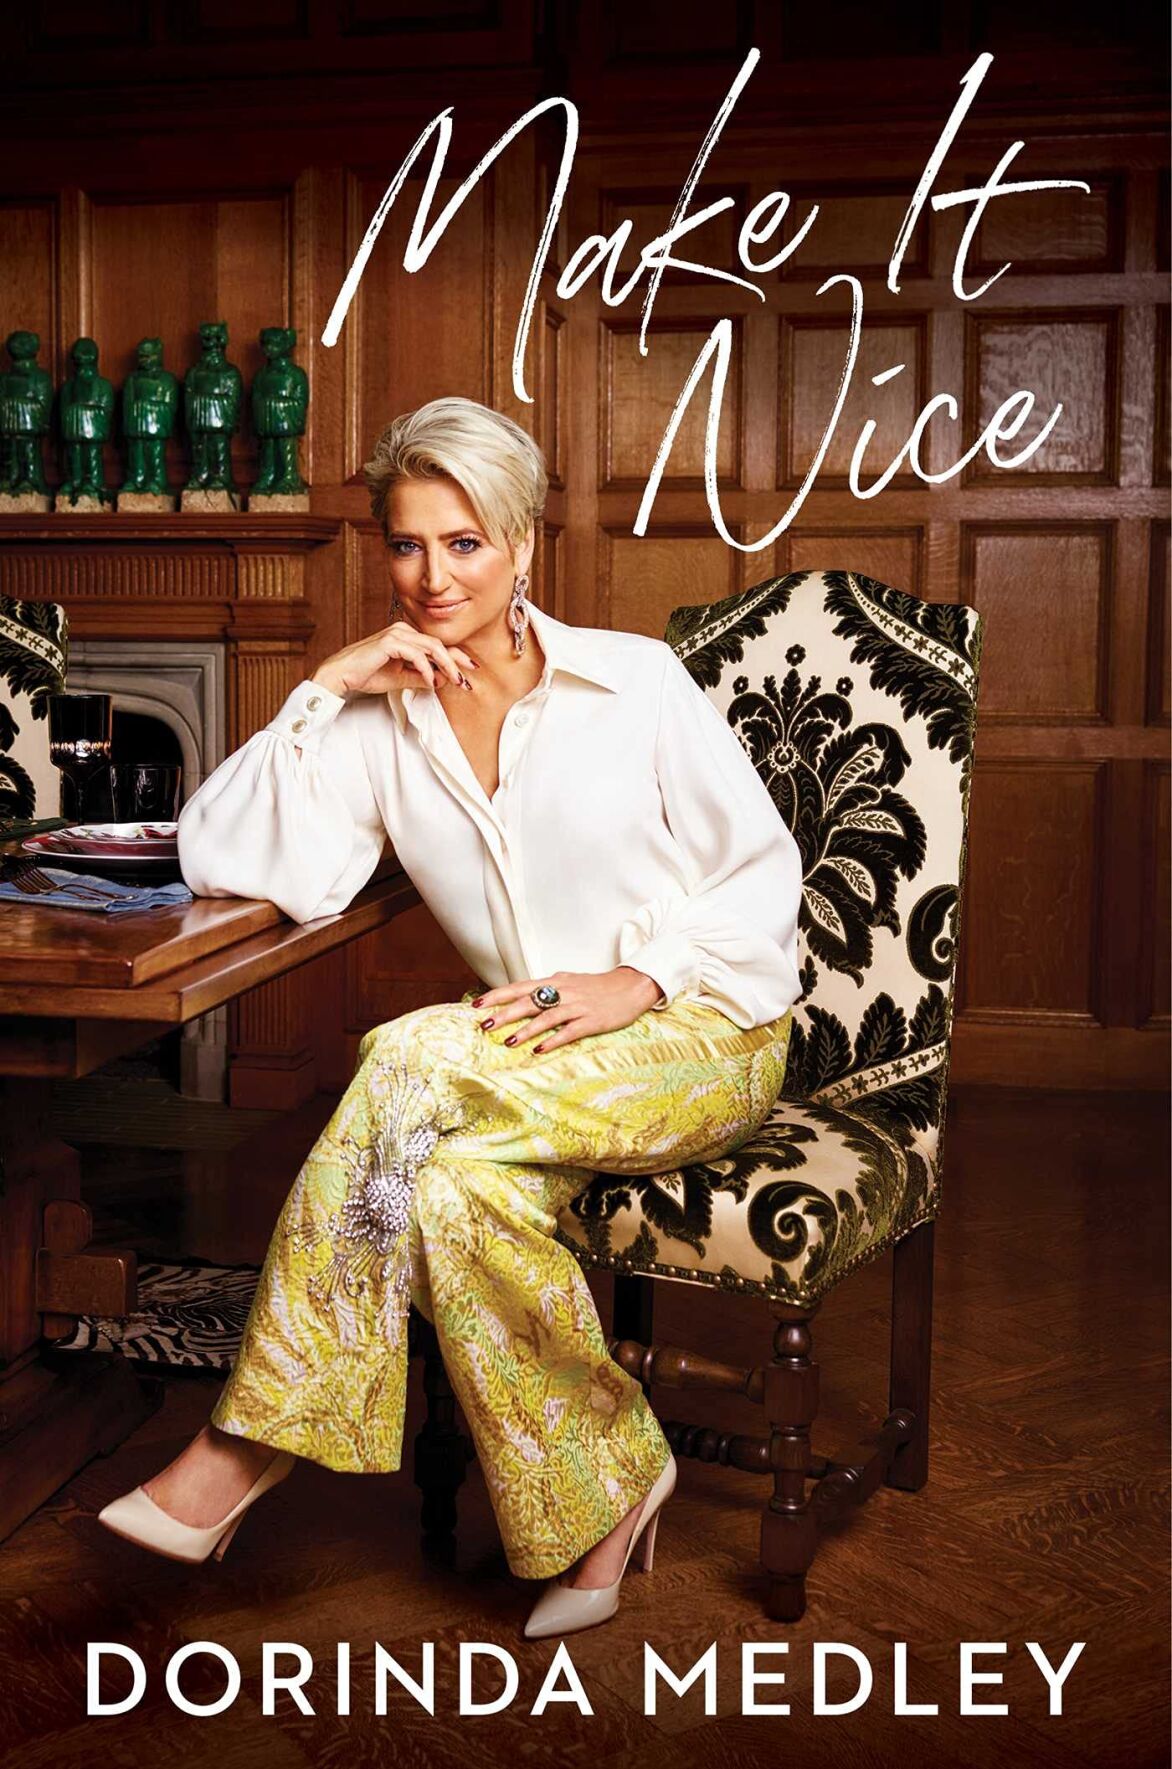 Dorinda Medley may have been a 'Real Housewife of New York City', but  she'll always be a Berkshires housewife first, Books